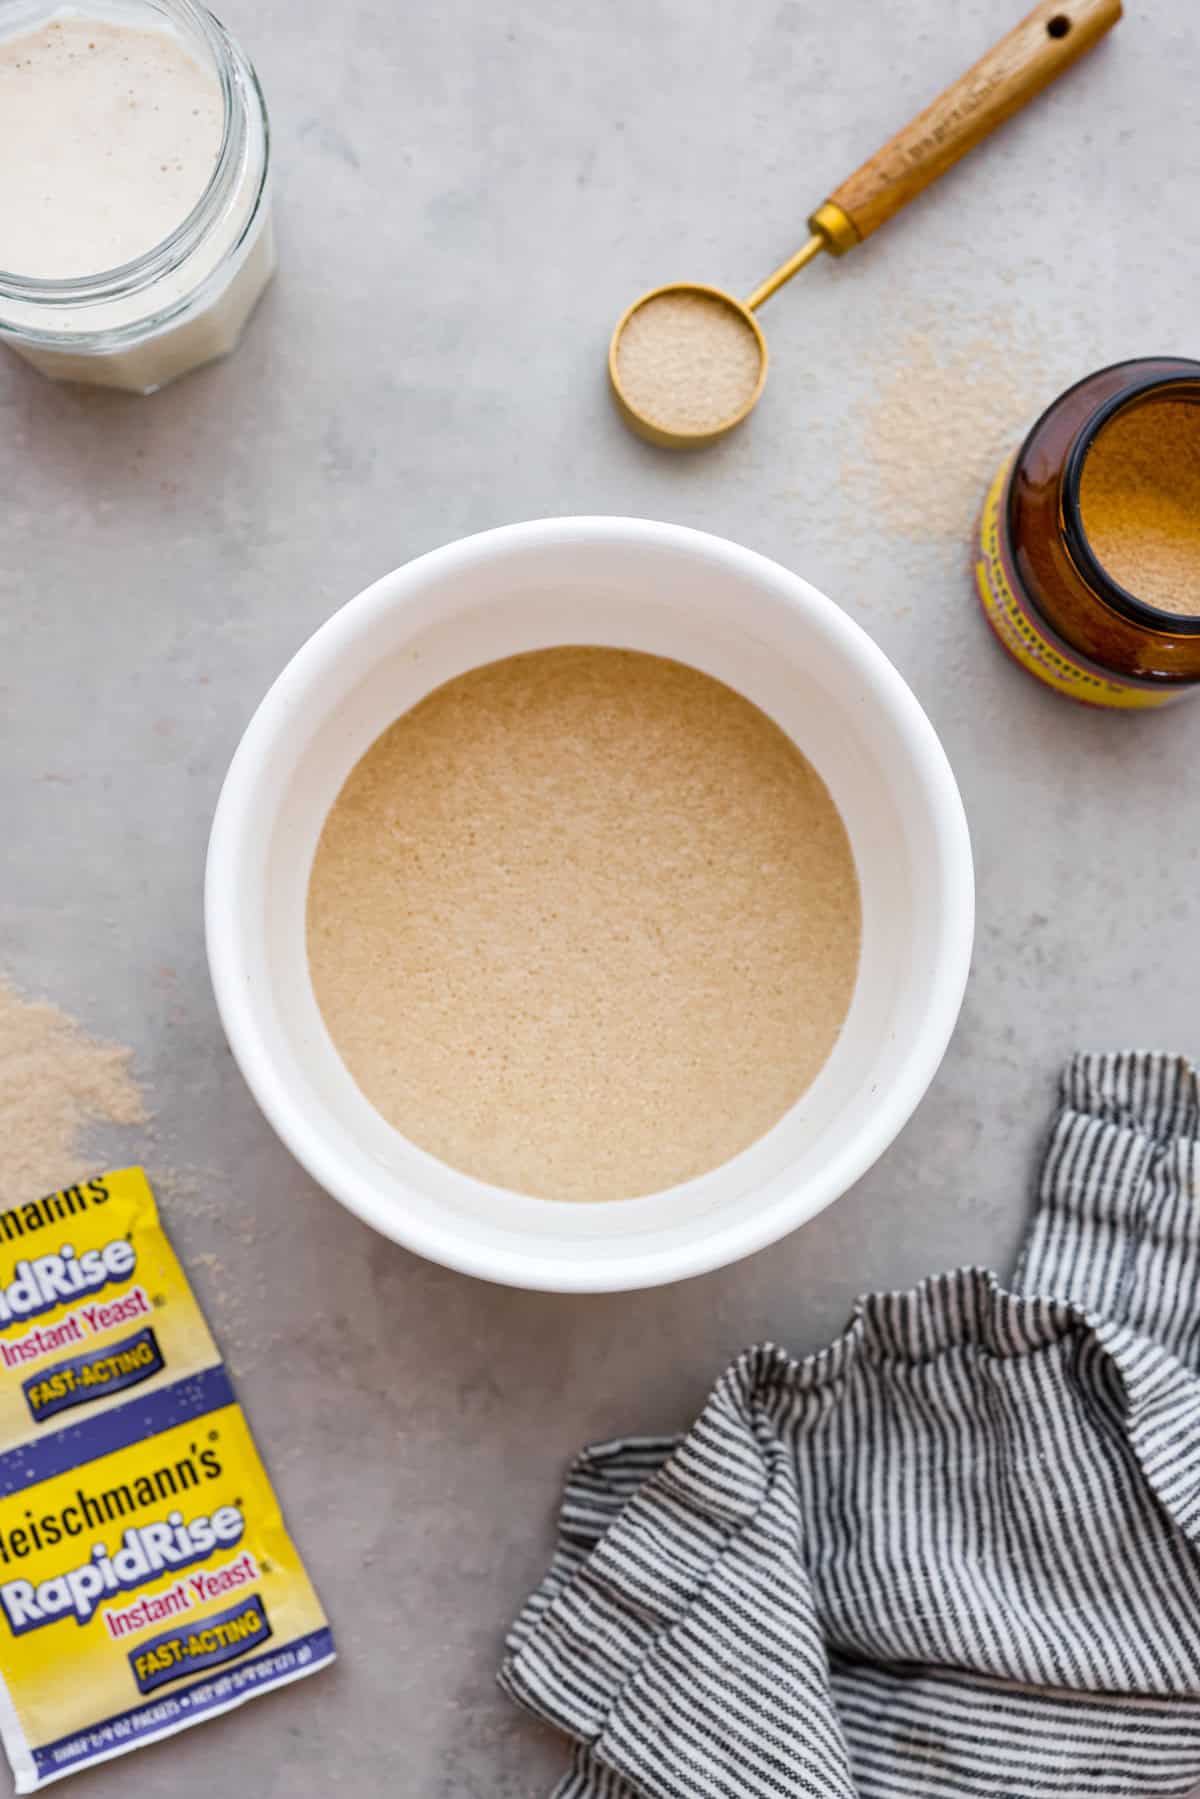 How to Bake with Yeast